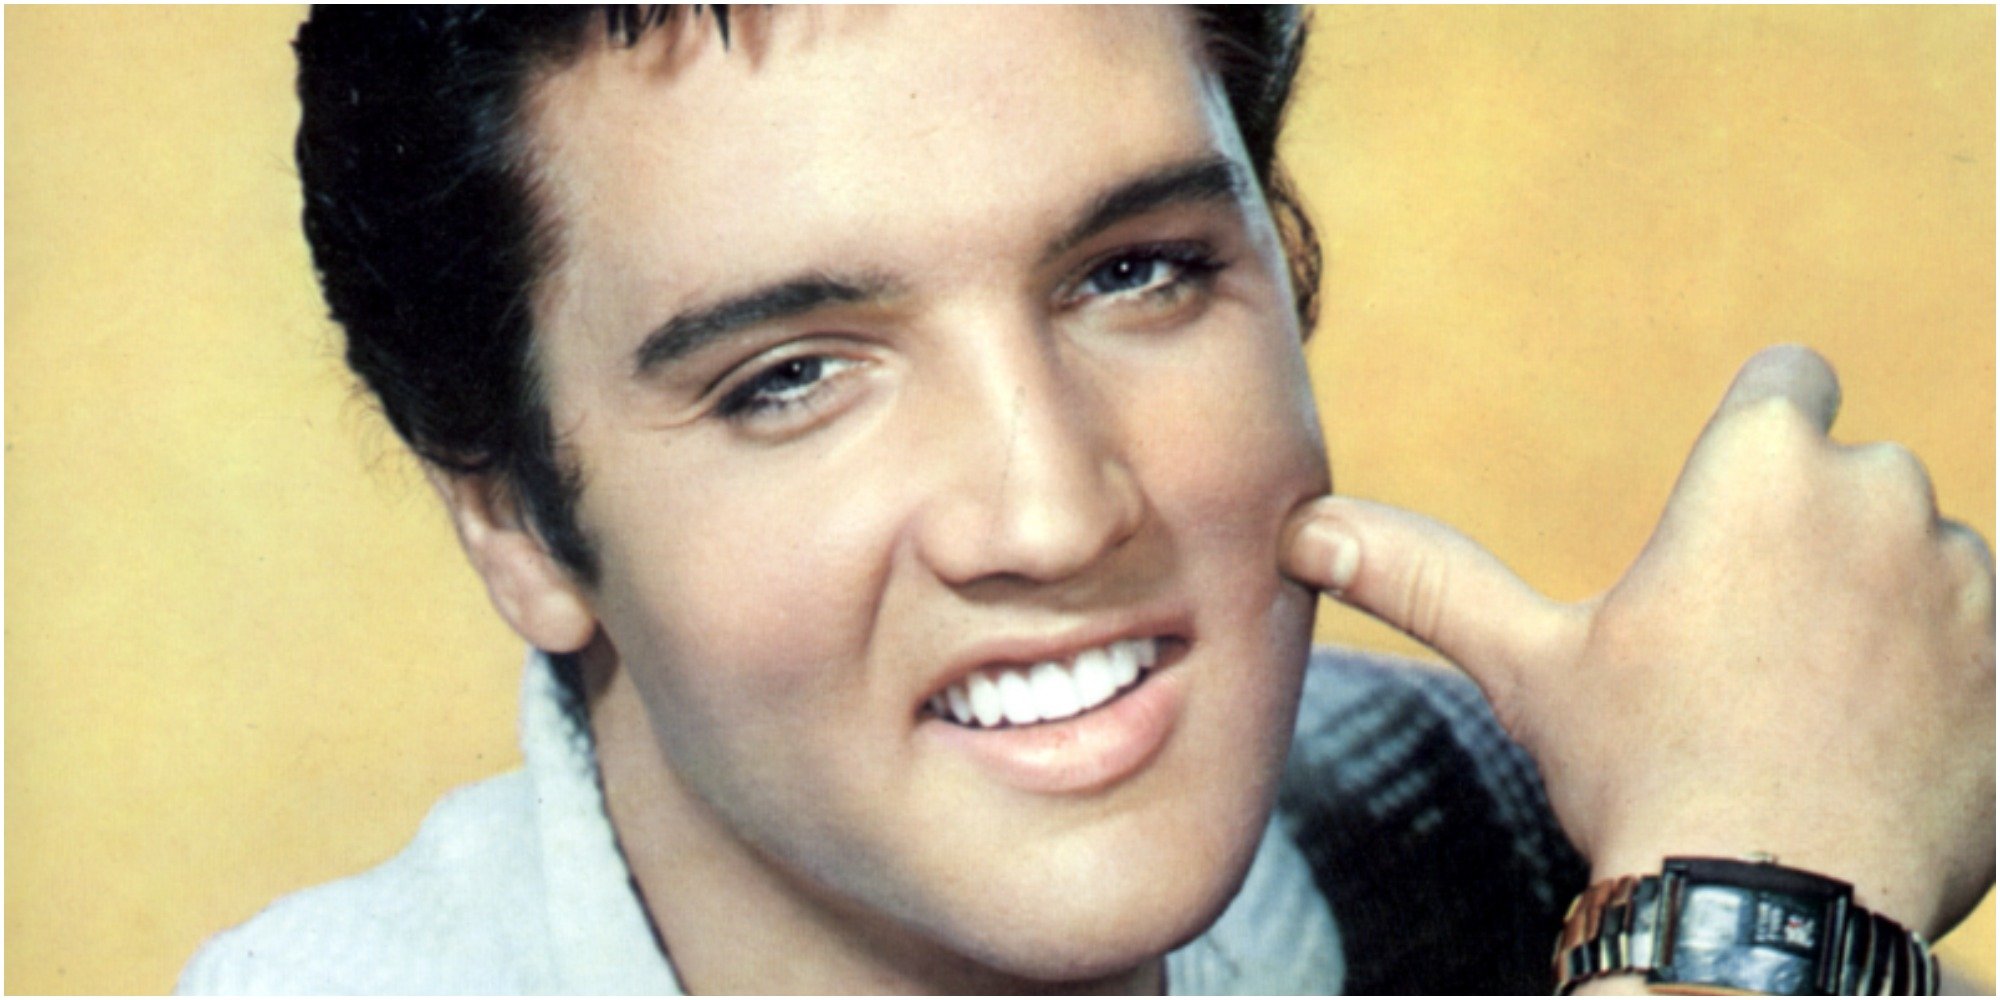 Elvis Presley Reportedly Ate an Entire Box of These Sweet Treats in One Sitting